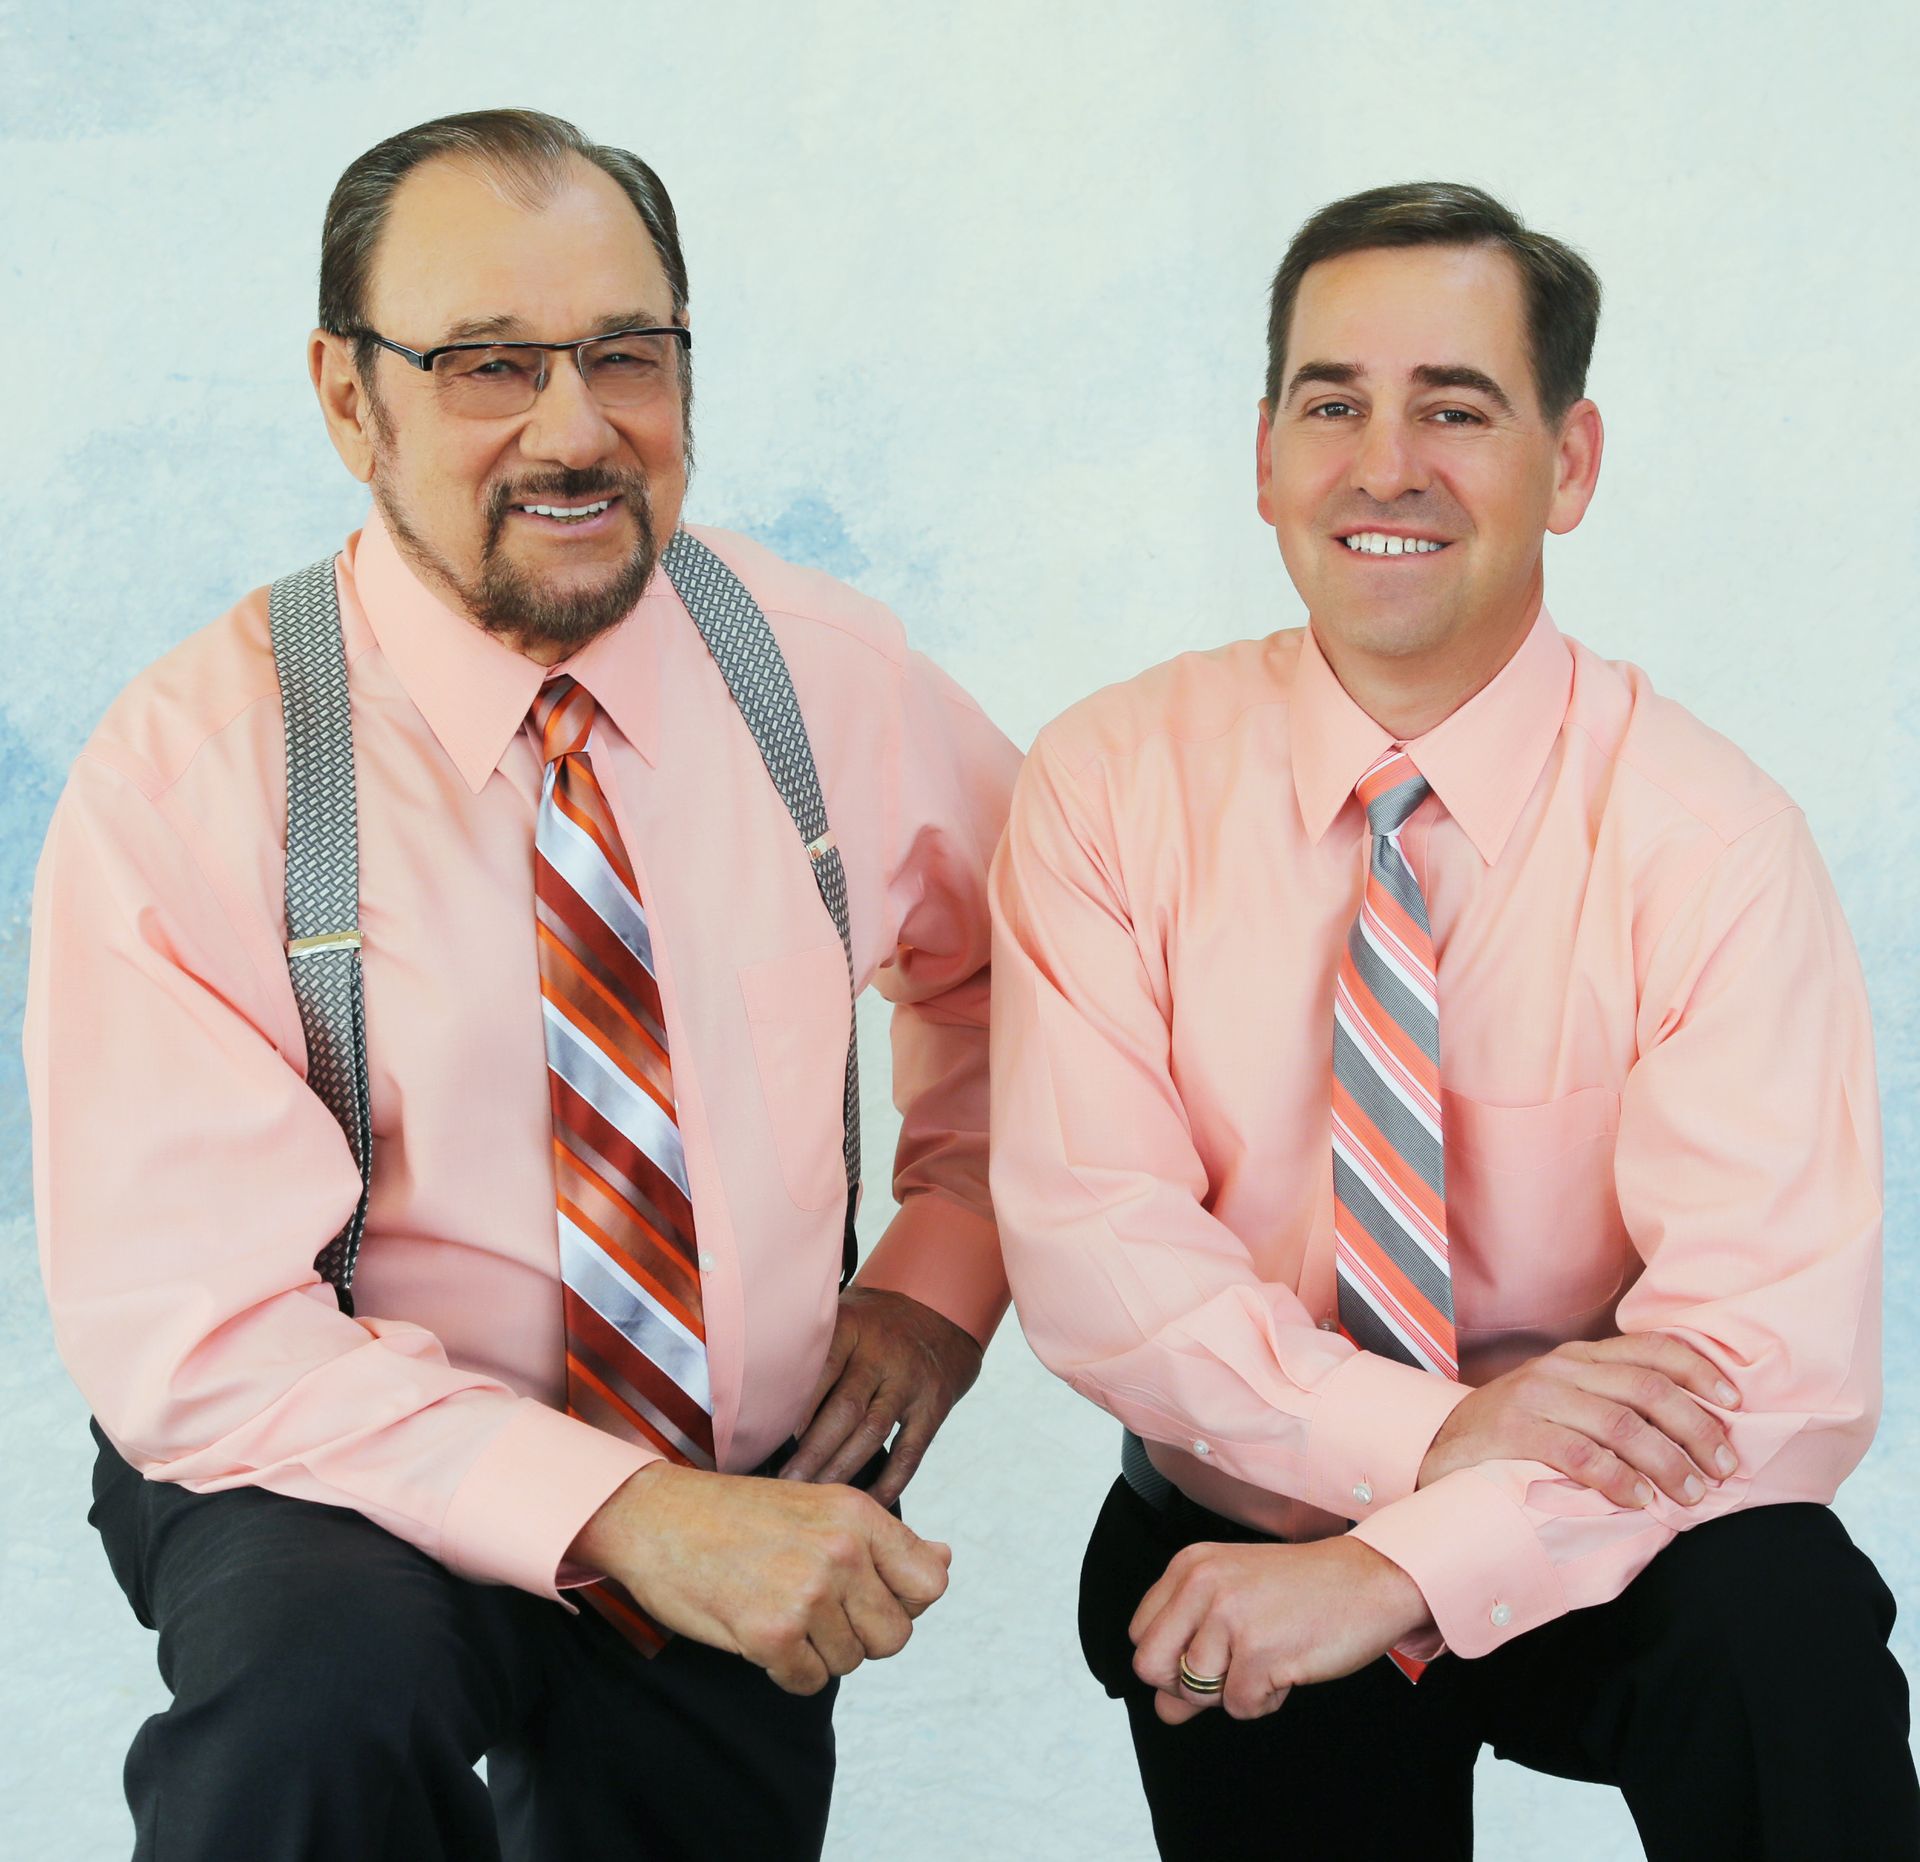 Welcome Message to New Dental Patients from Dr. George and Dr. Grucella